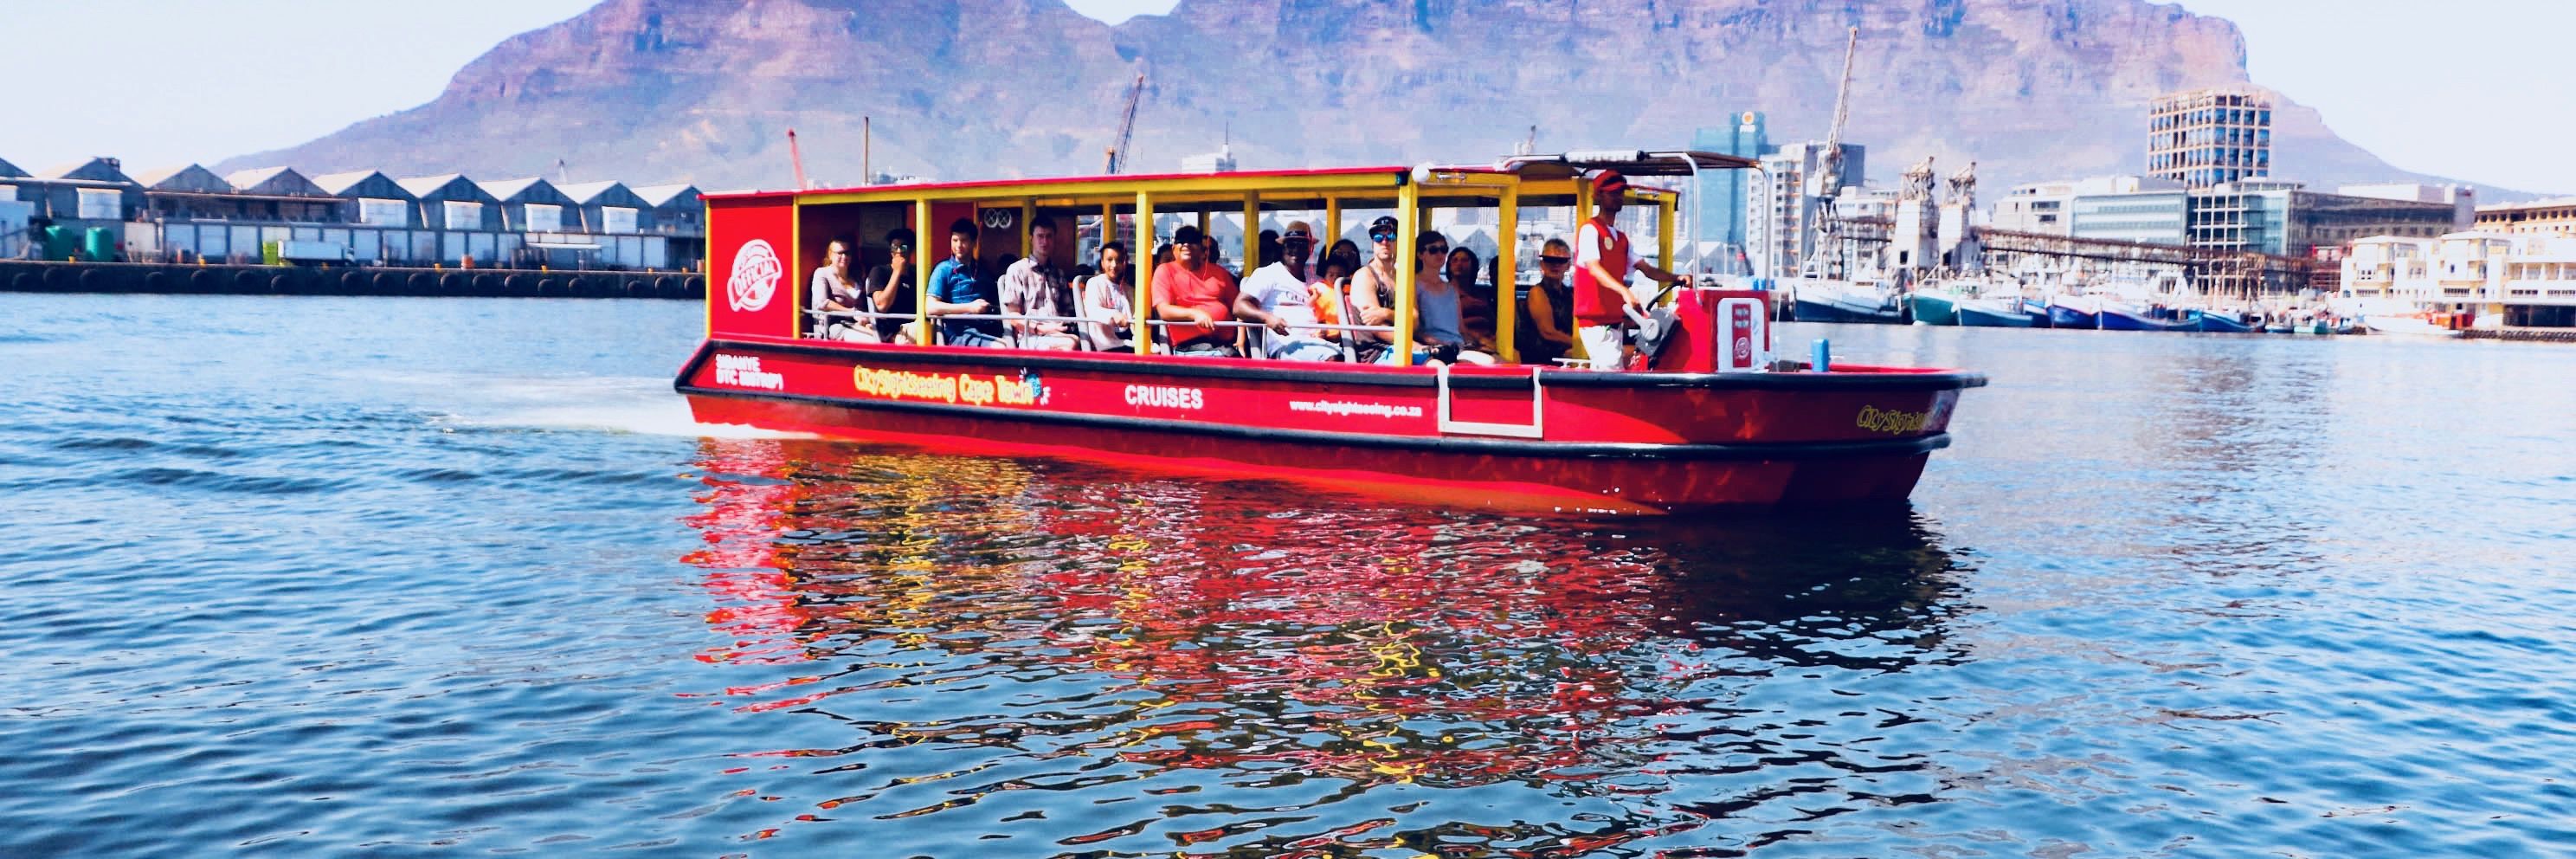 Cape Town Harbour Cruise City Sightseeing